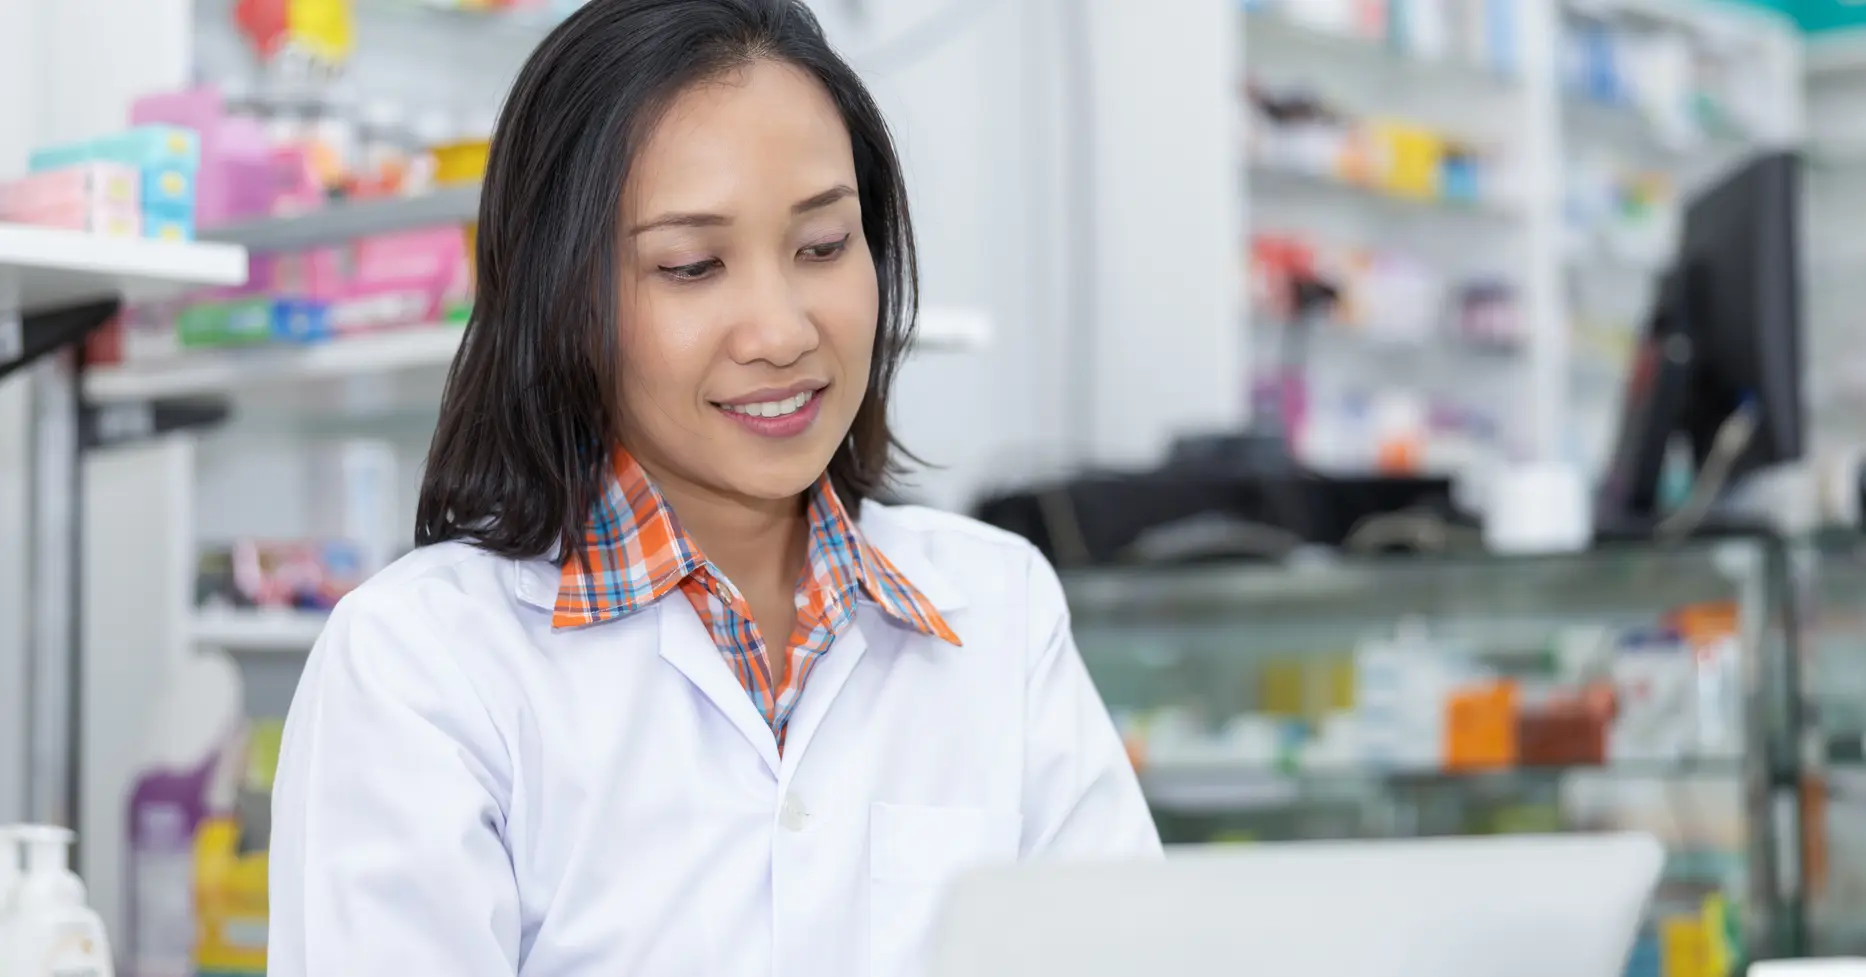 Pharmacist checking inventory on laptop in pharmacy